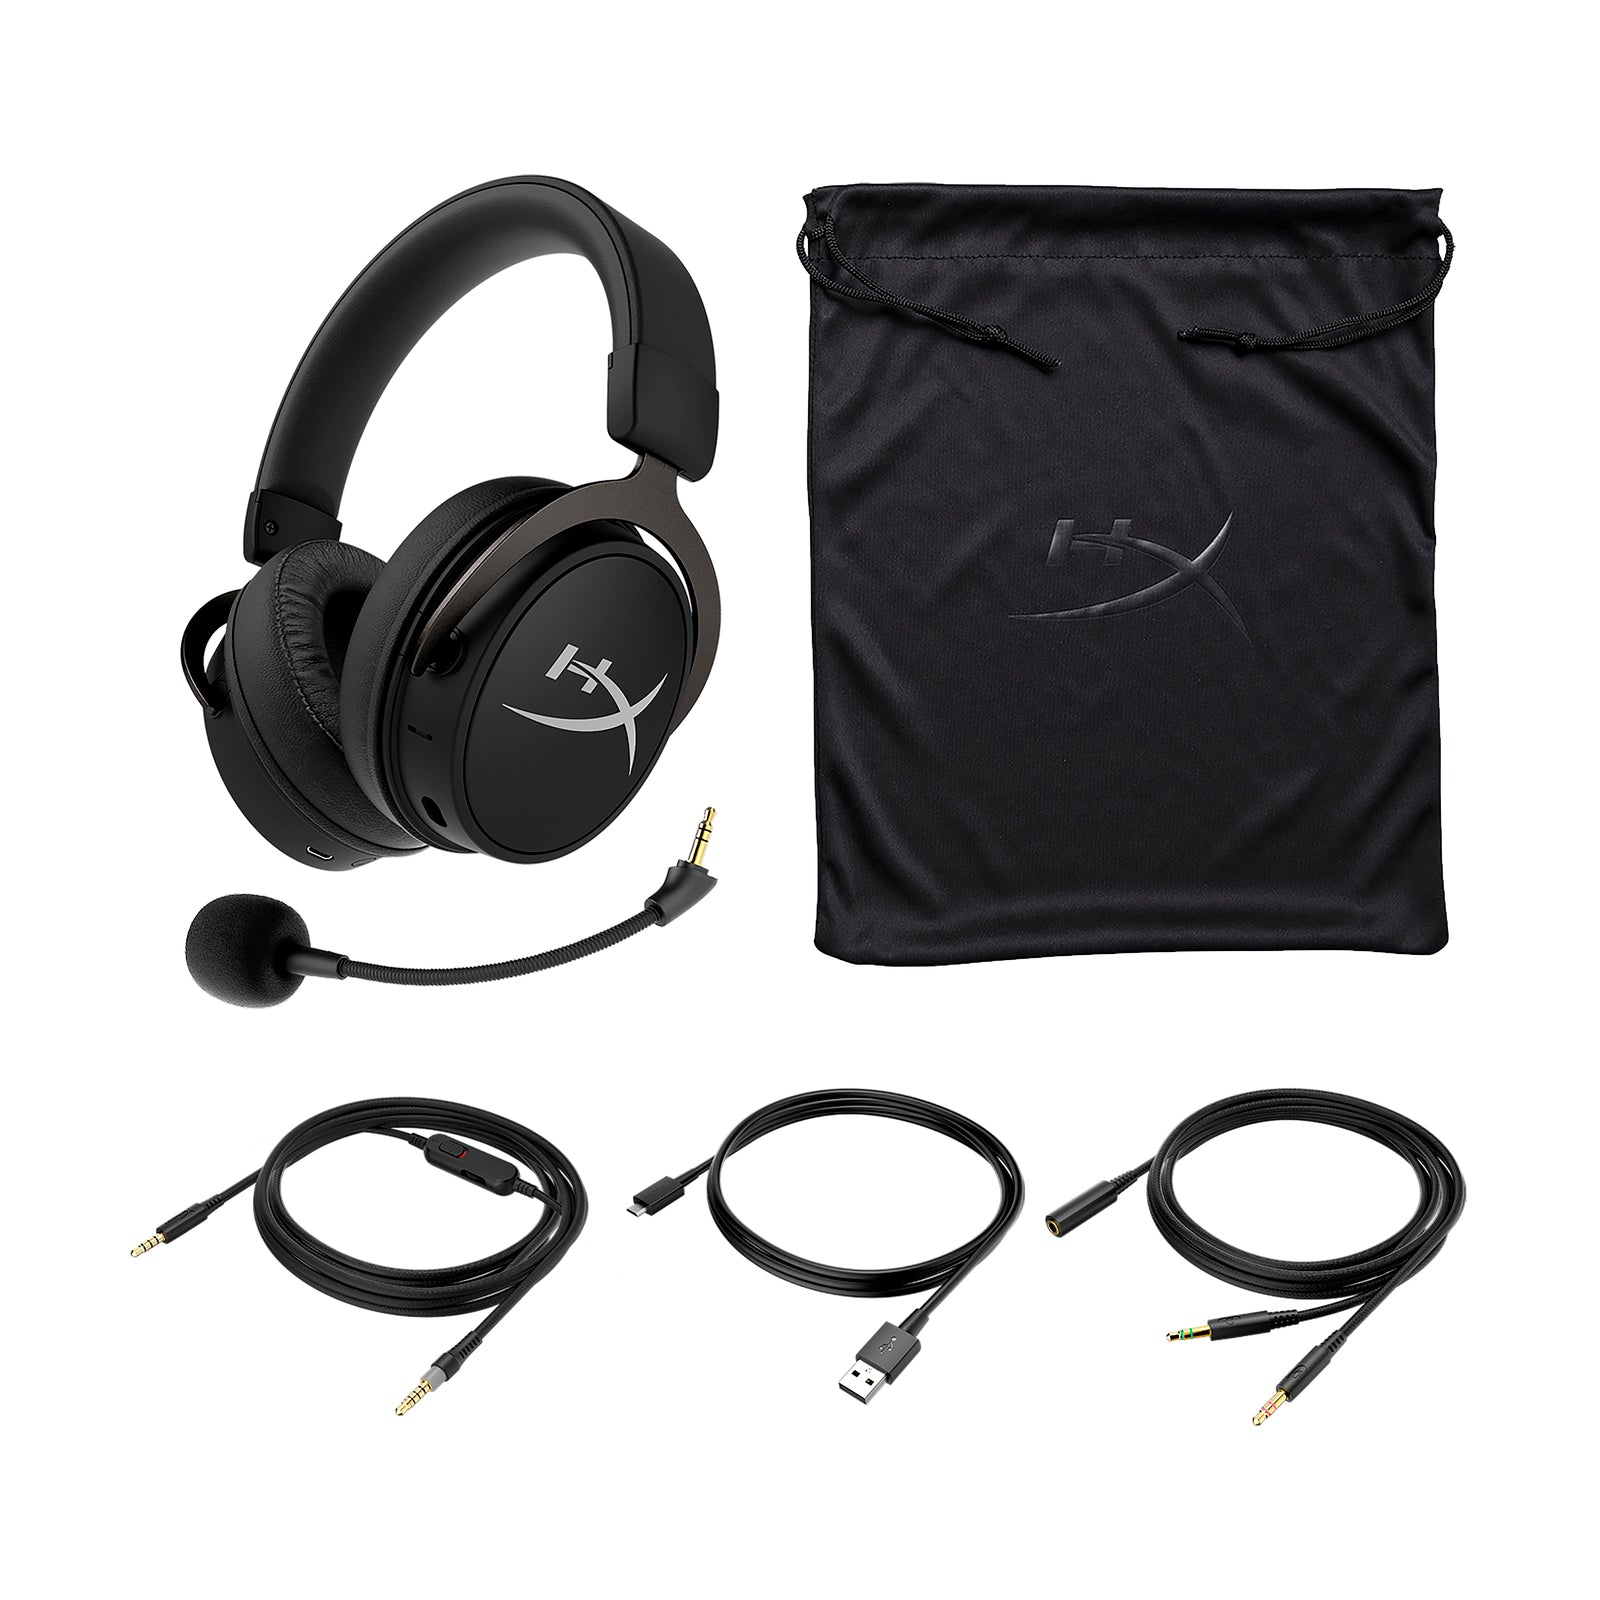 Cloud MIX – Bluetooth Headphones and Wired Gaming Headset | HyperX 